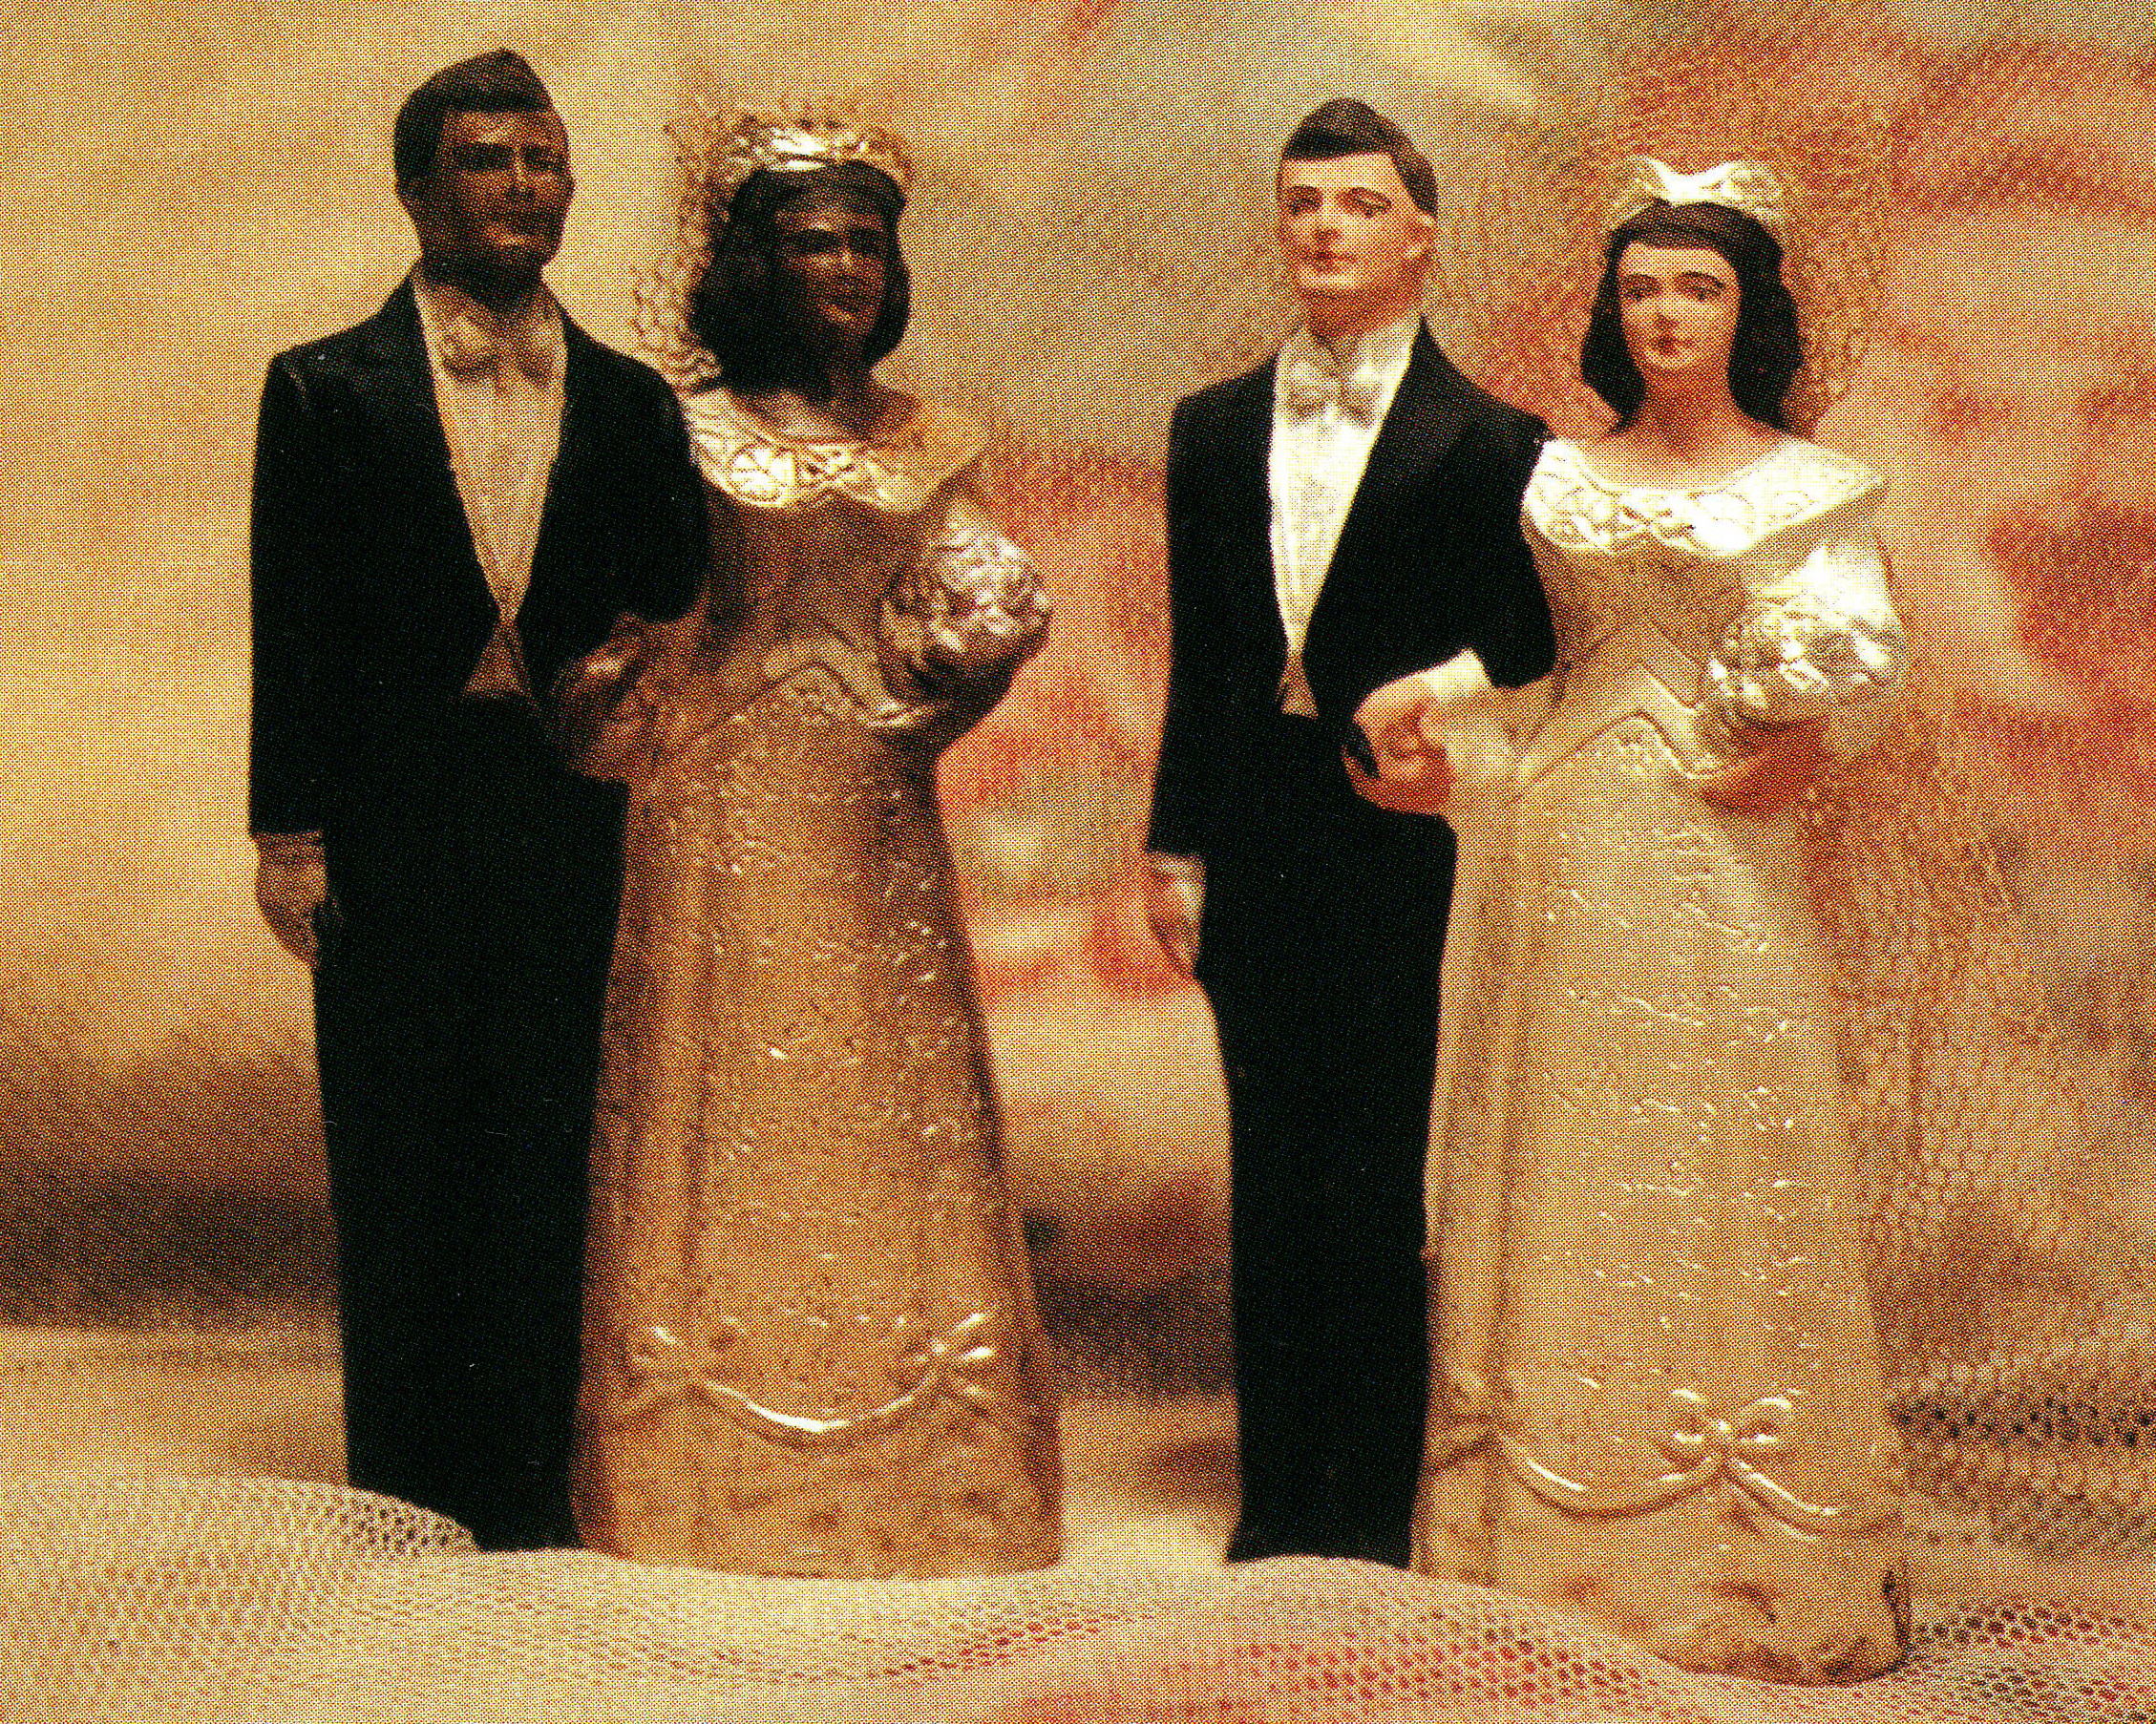 Figures of a Black bride and groom and a white bride and groom, identical except for skin color